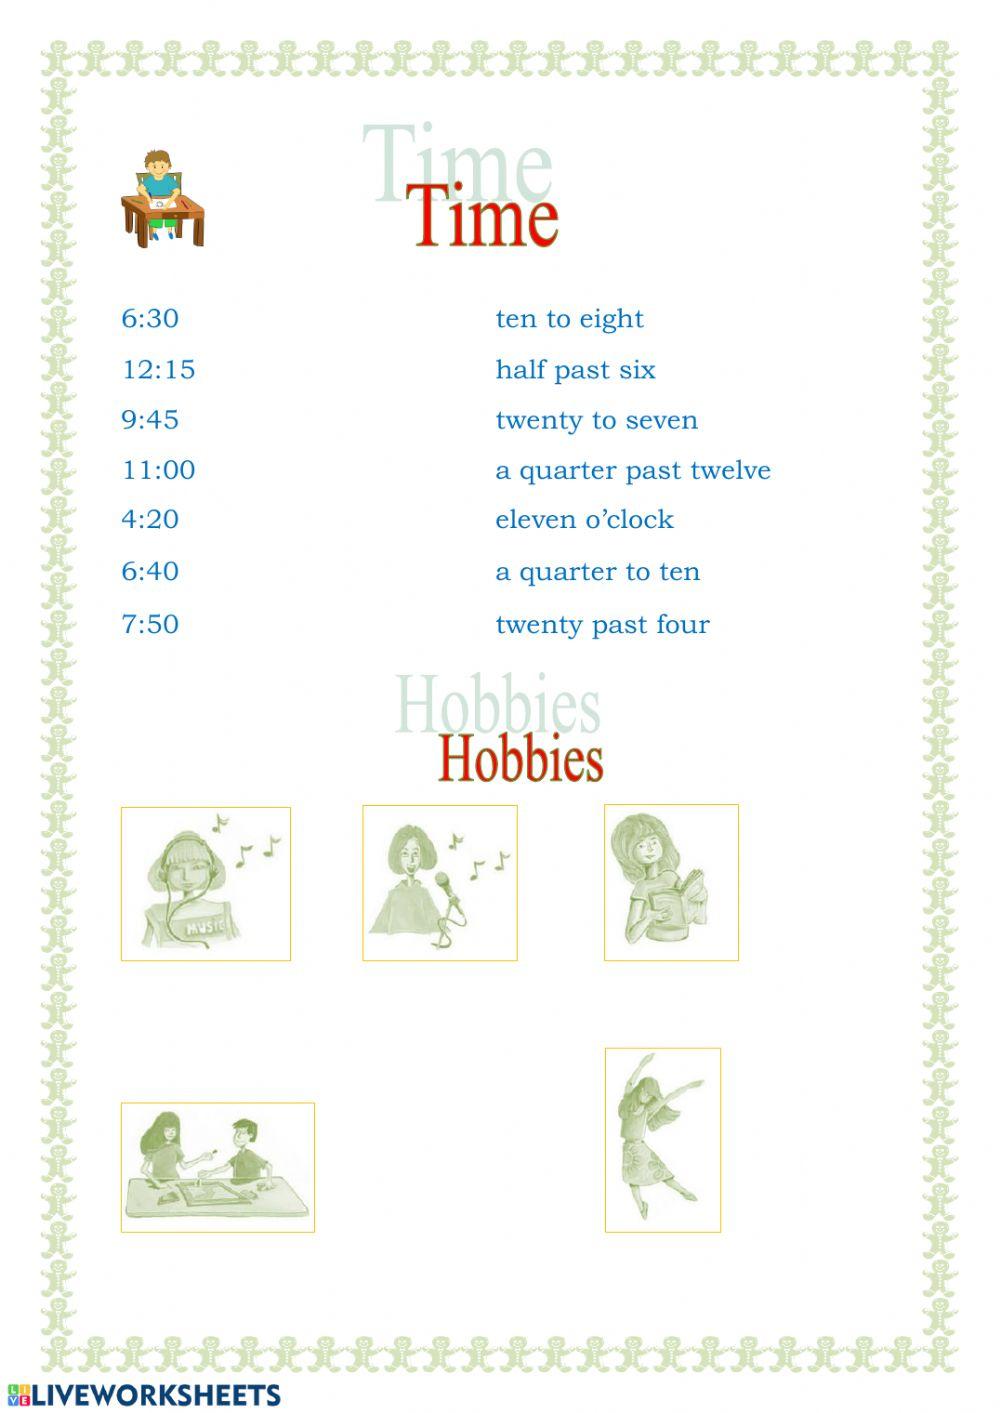 TIME AND HOBBIES